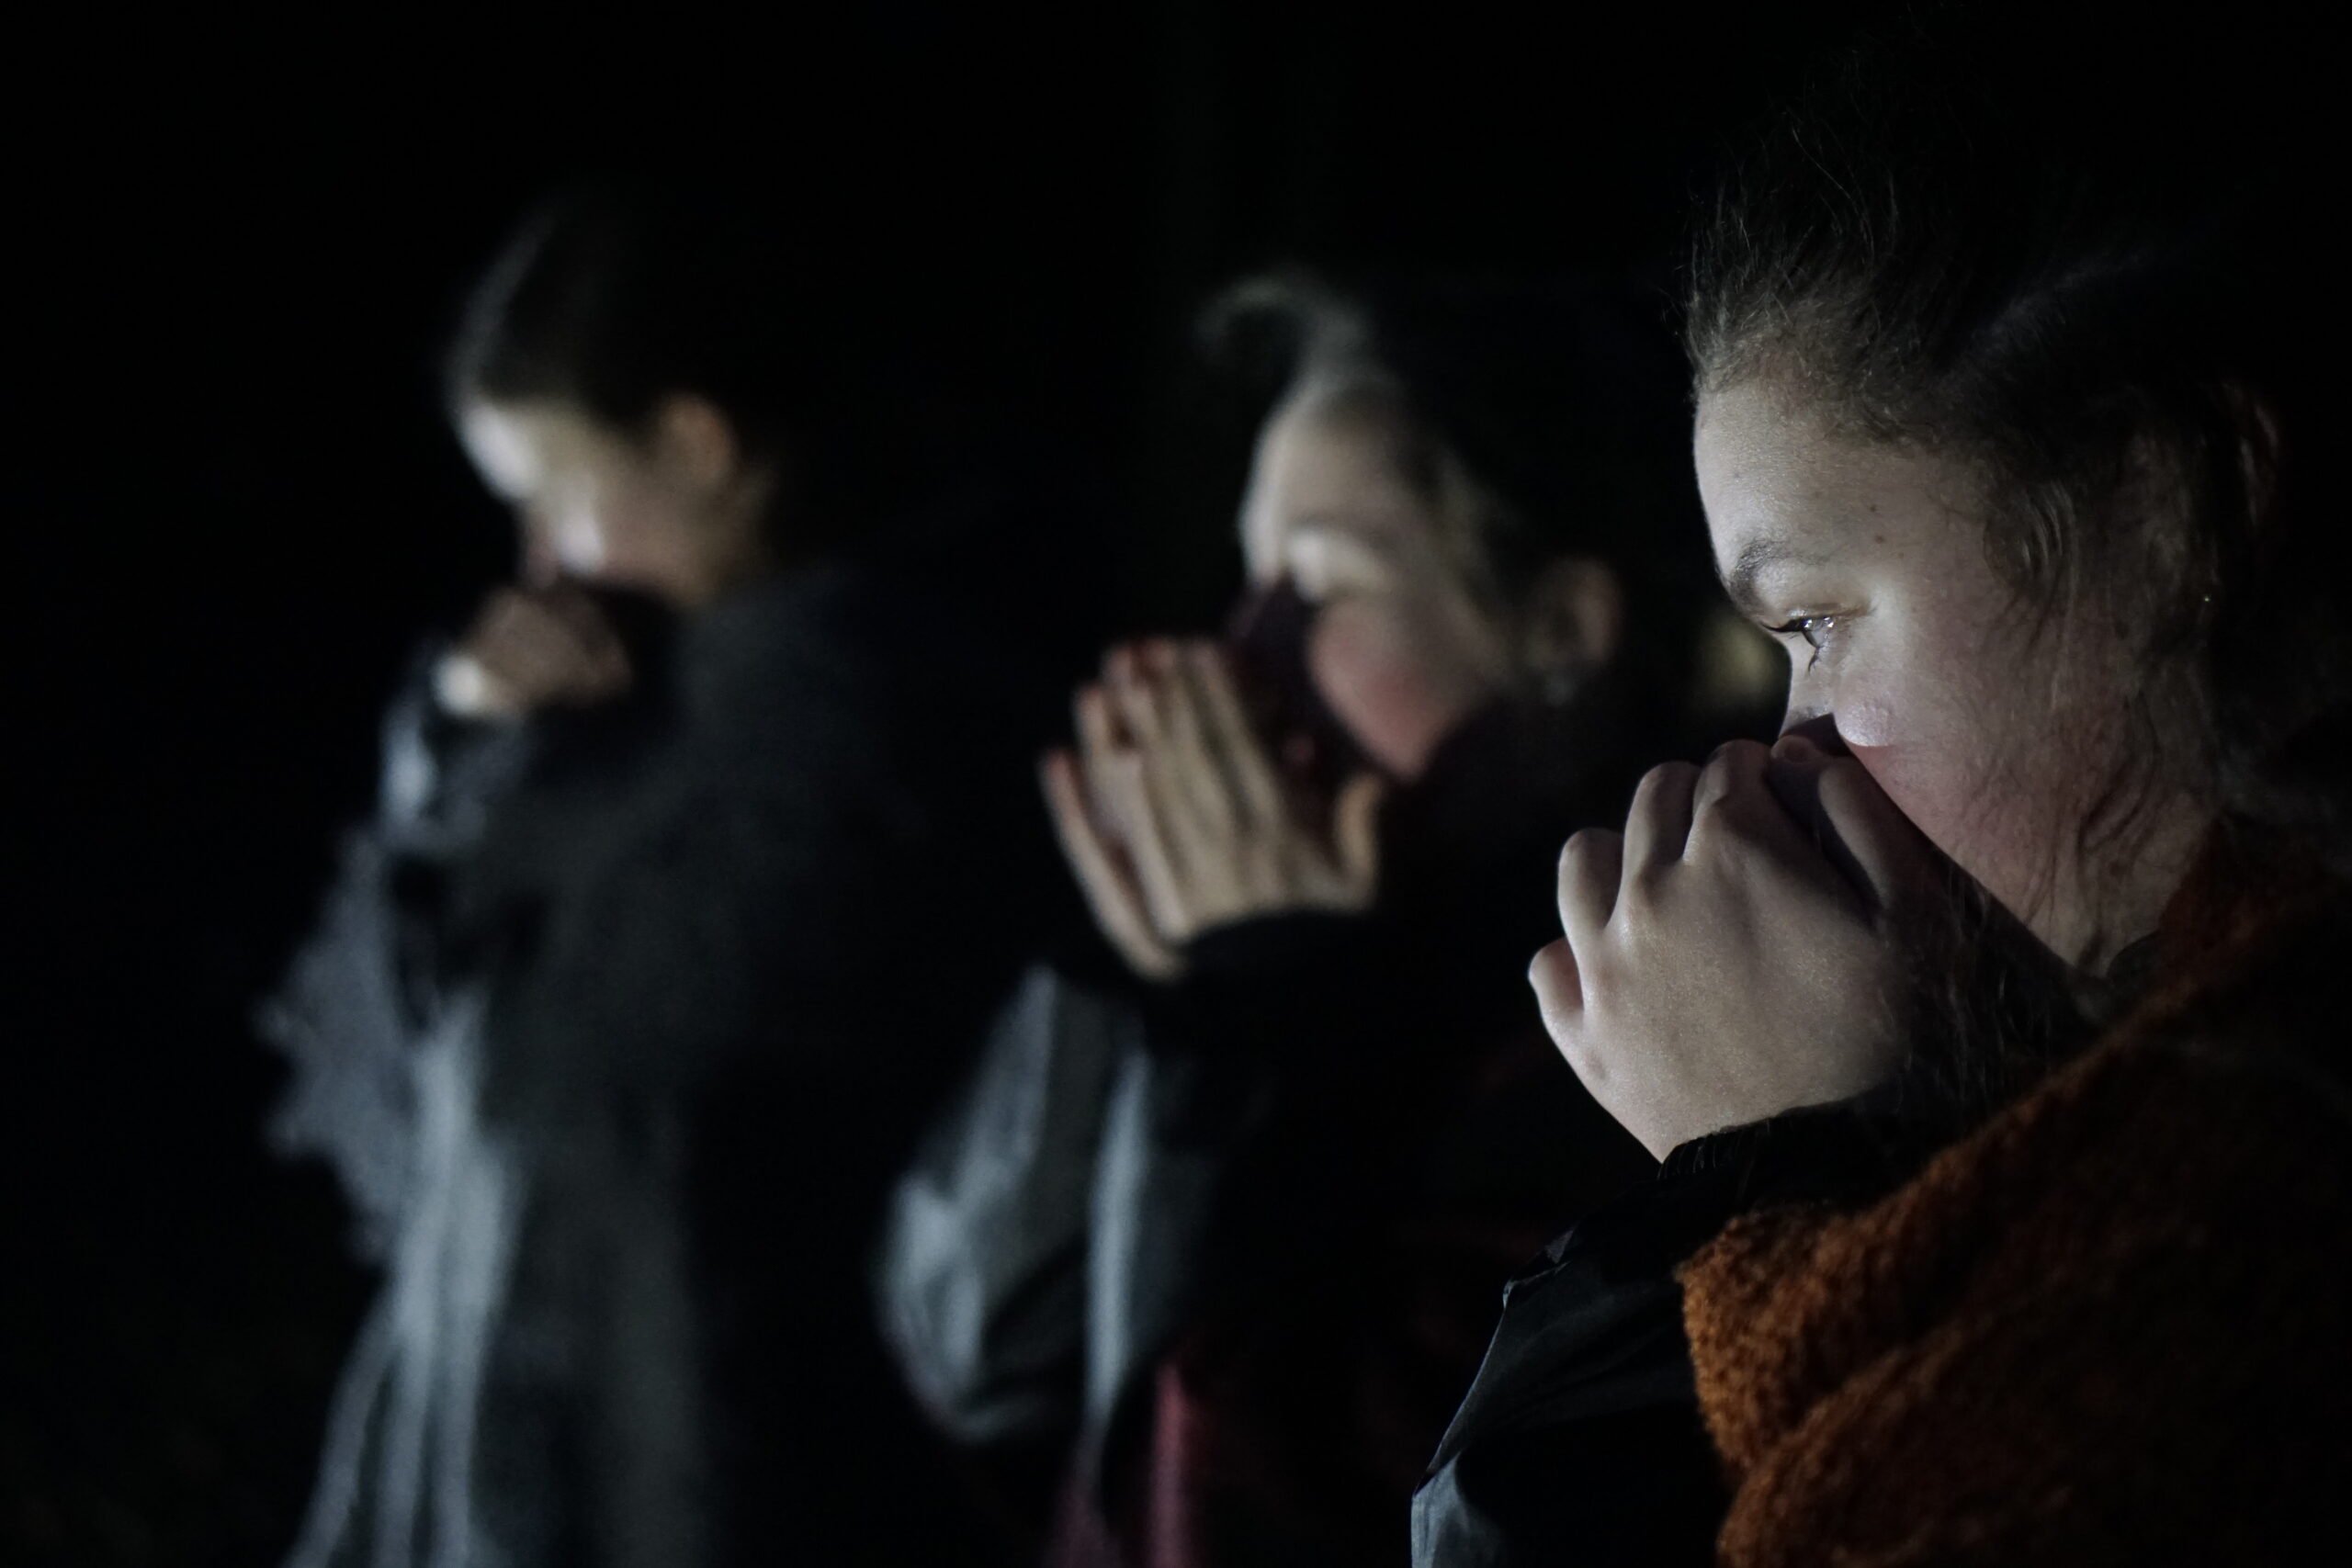 Three young actors in the dark, hold their faces as though in fear